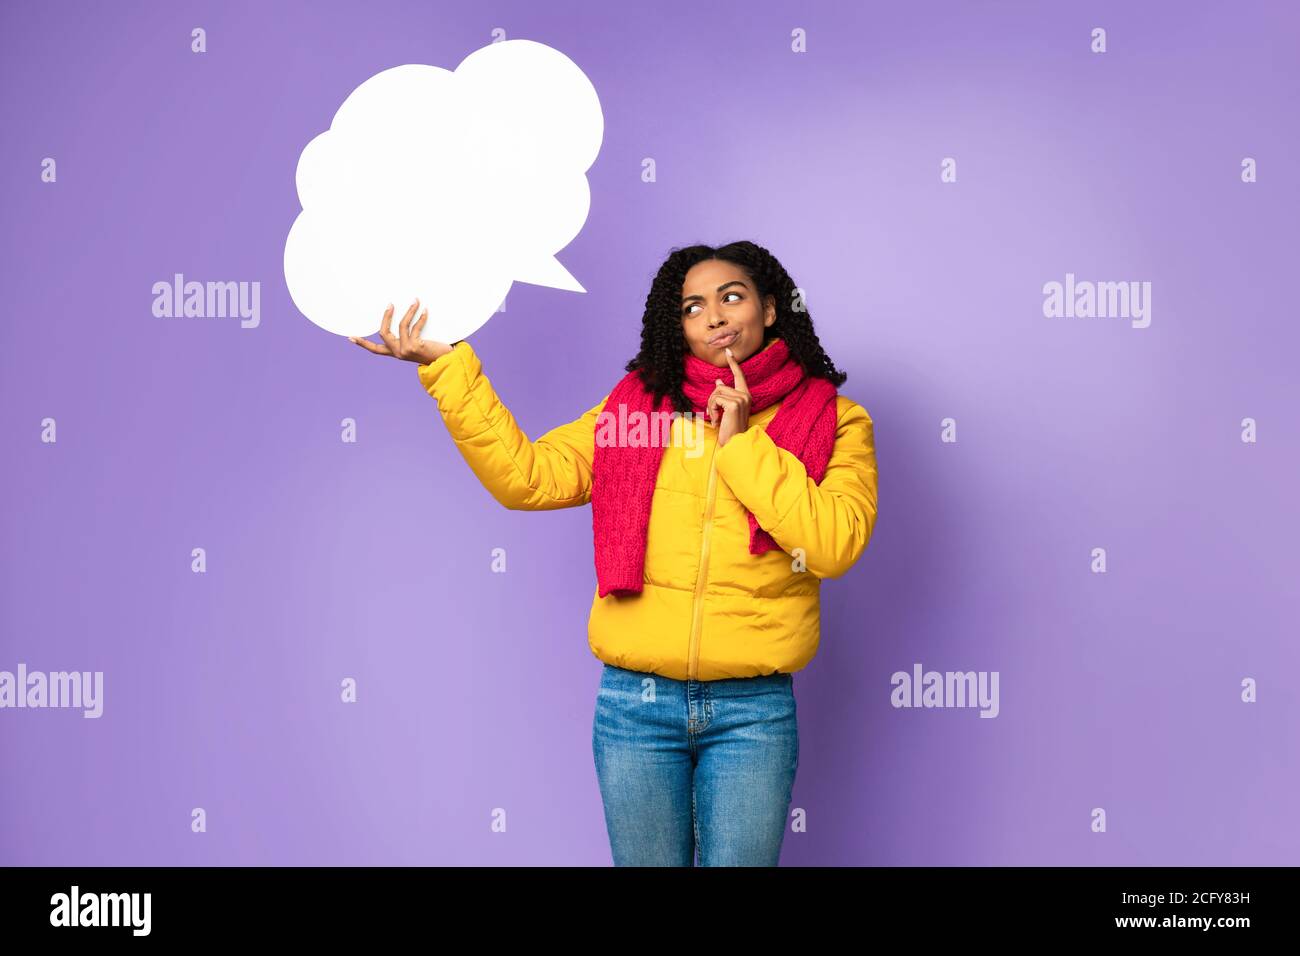 Thoughtful Black Girl Holding Speech Bubble Above Head In Studio Stock Photo